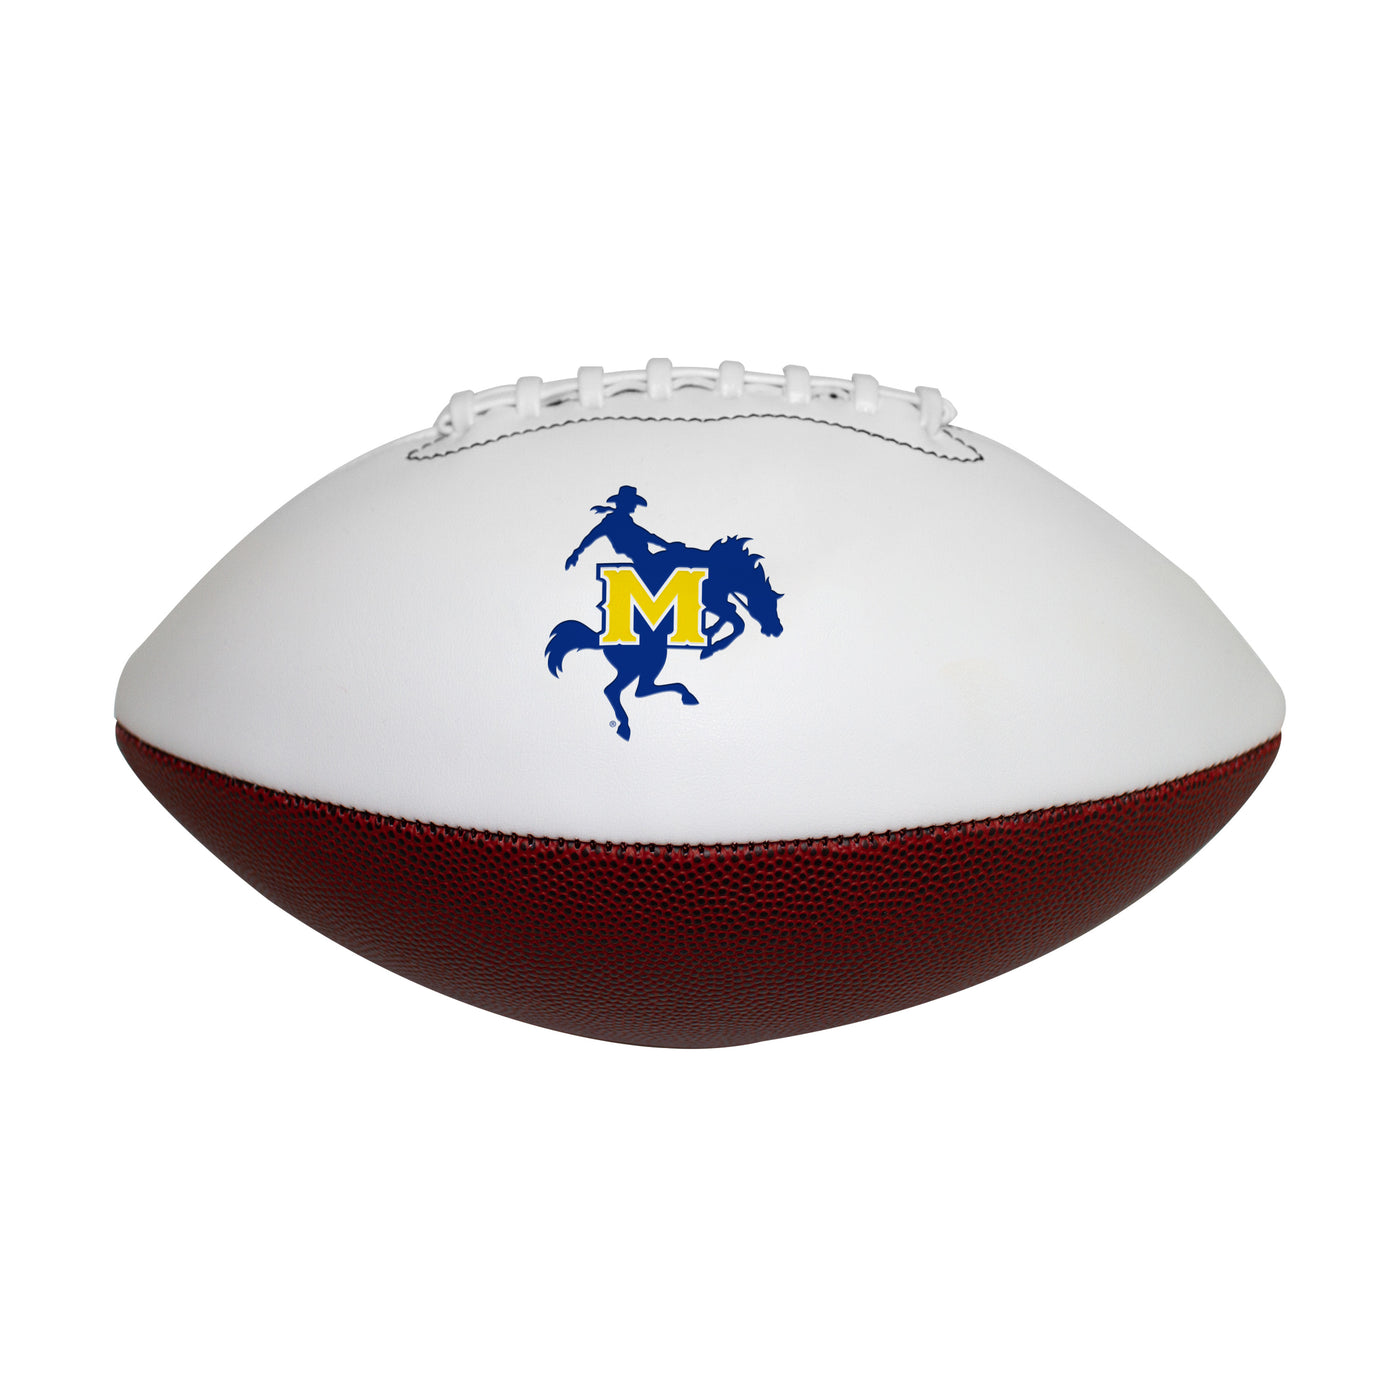 McNeese State Official-Size Autograph Football